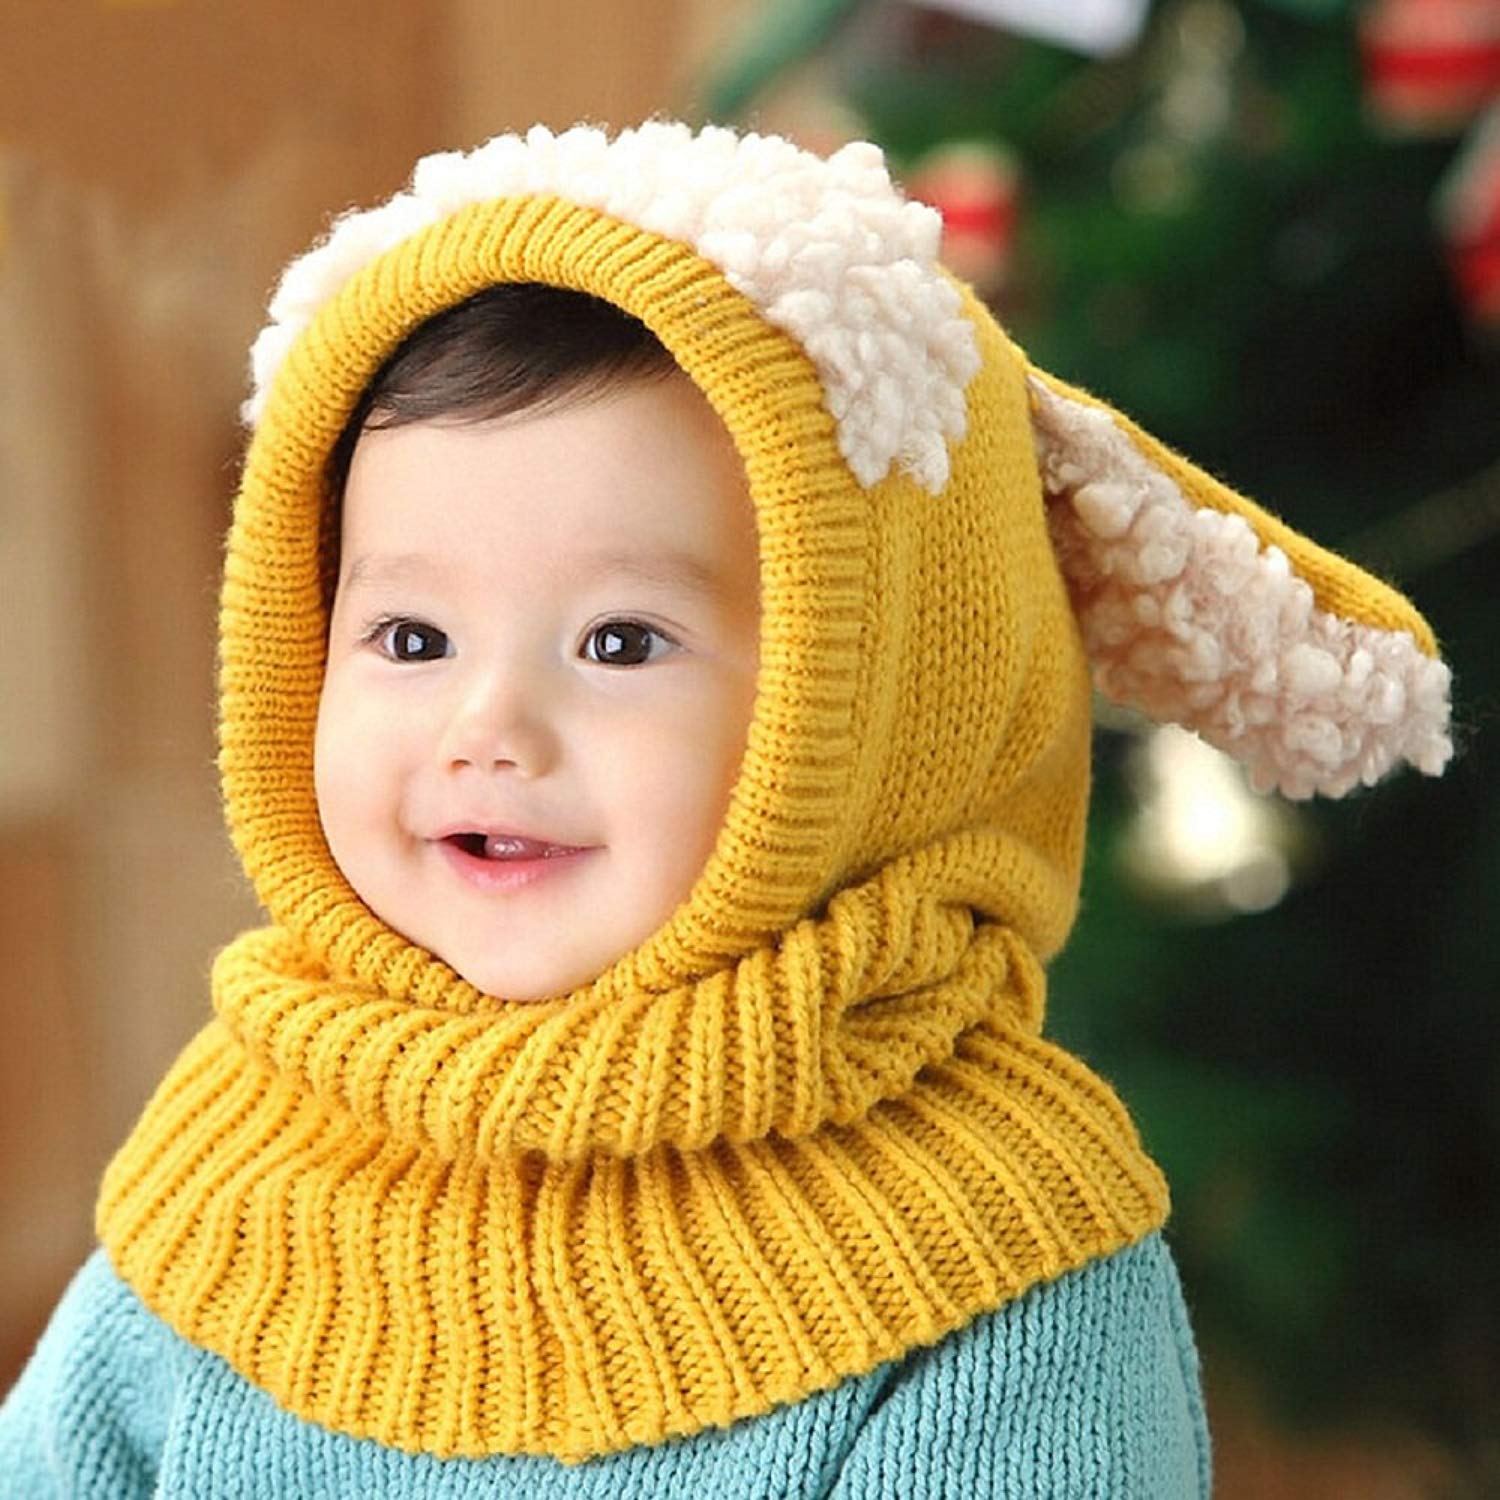 Cute Baby Smiling Funny Image Picture HD Photohoots